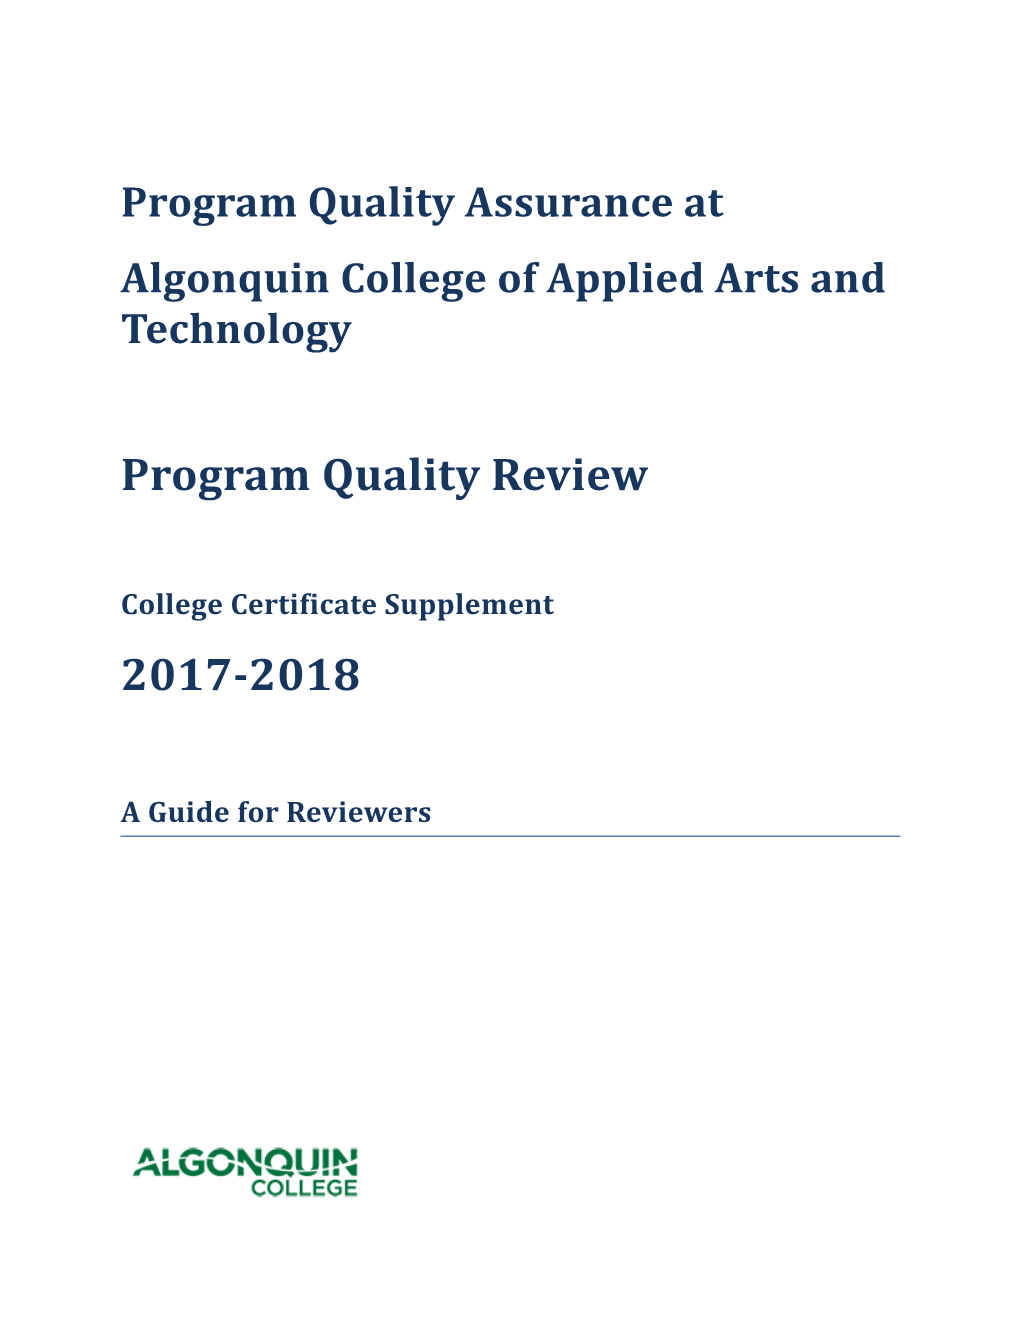 Program Quality Assurance at Algonquin College of Applied Arts and Technology s1